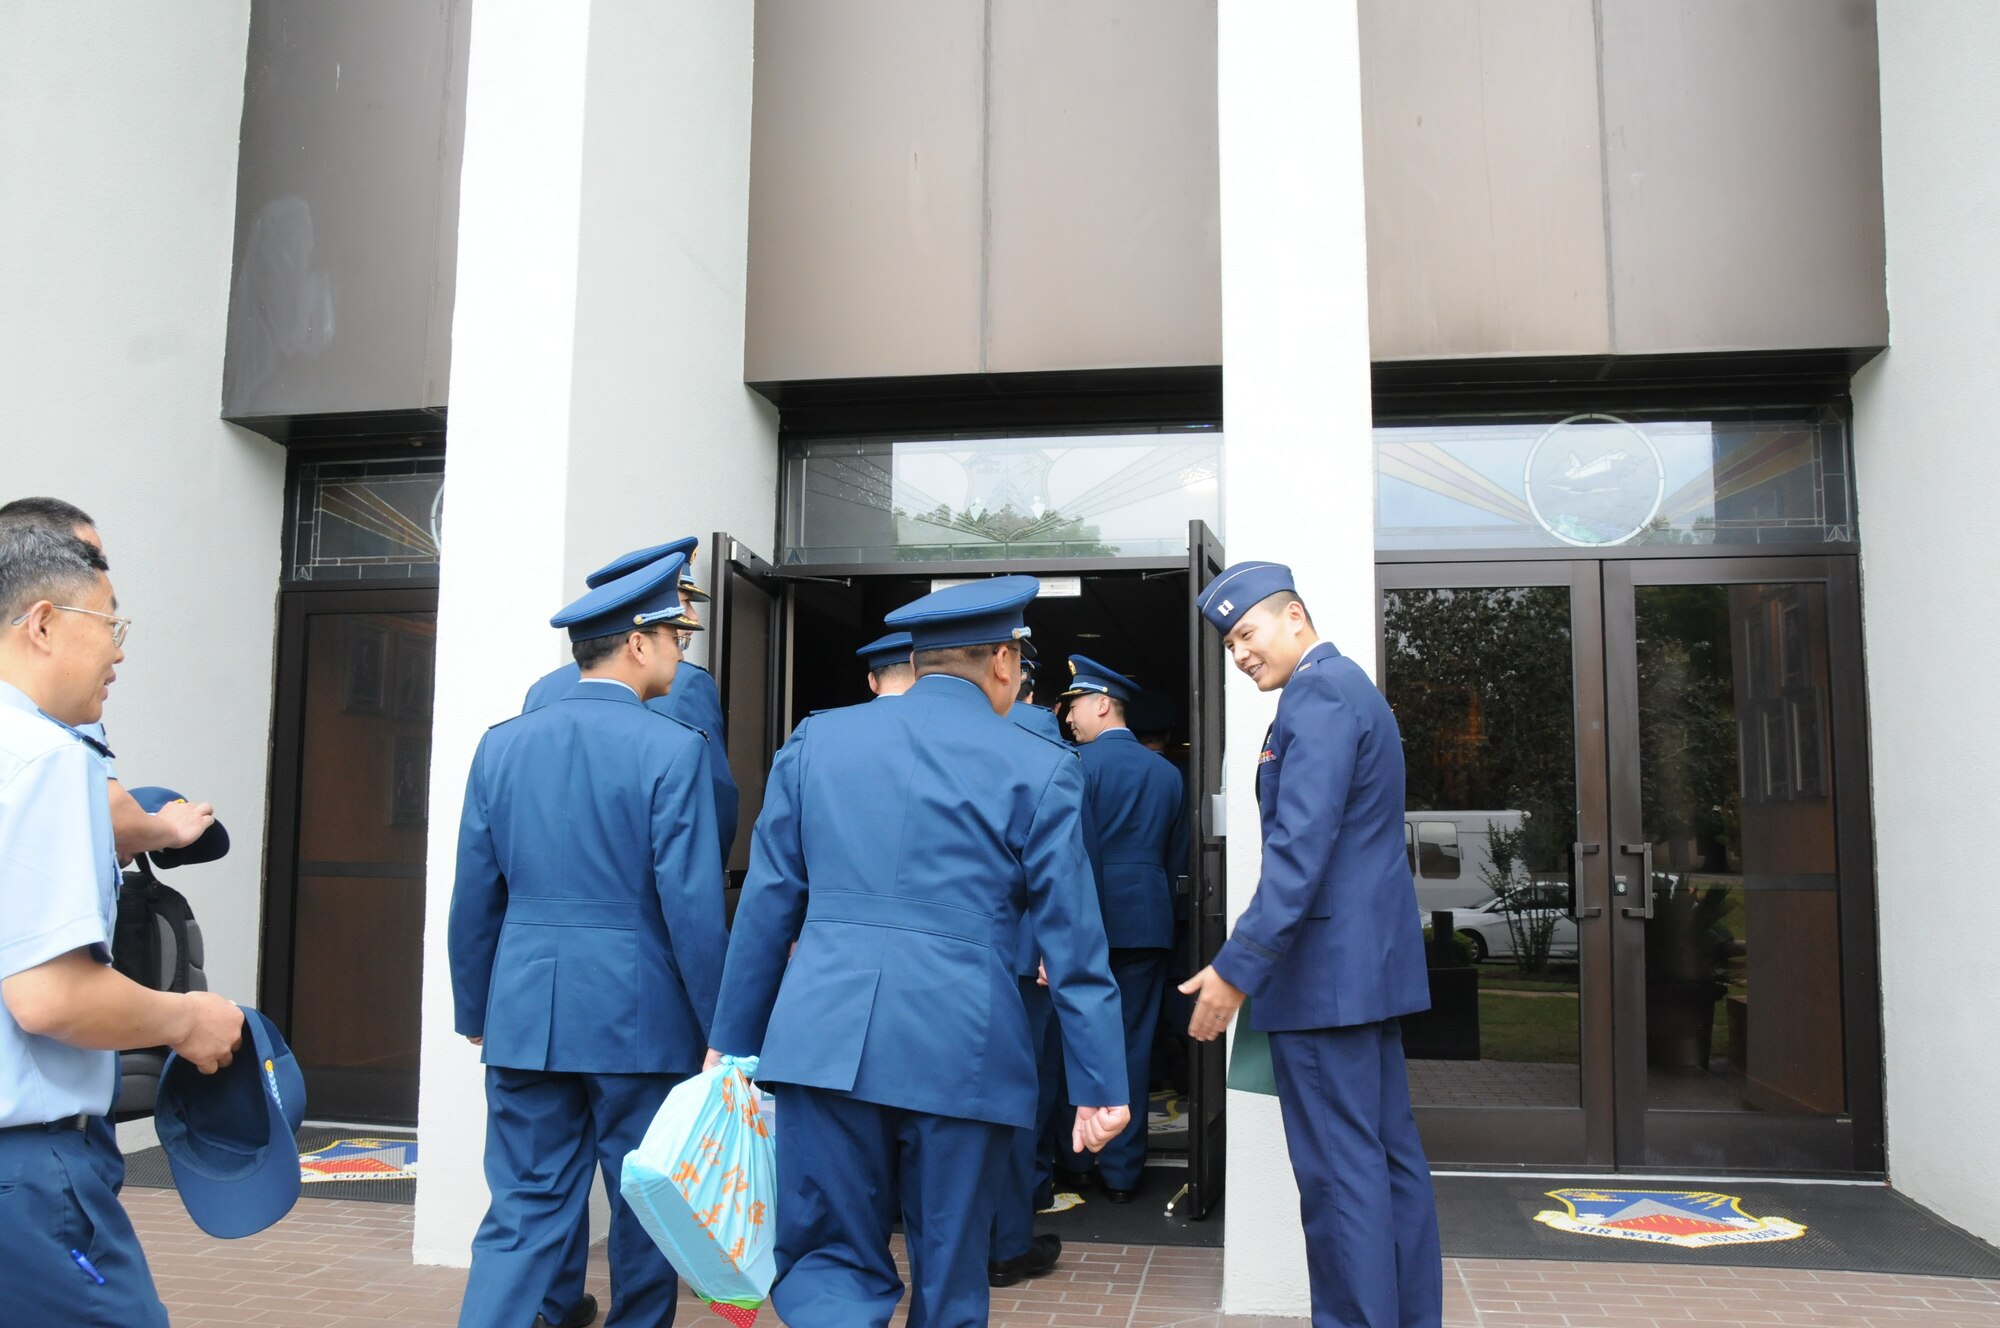 Midday and middle of the week, a wave of blue and navy uniforms washed over the inner circle of Air War College.